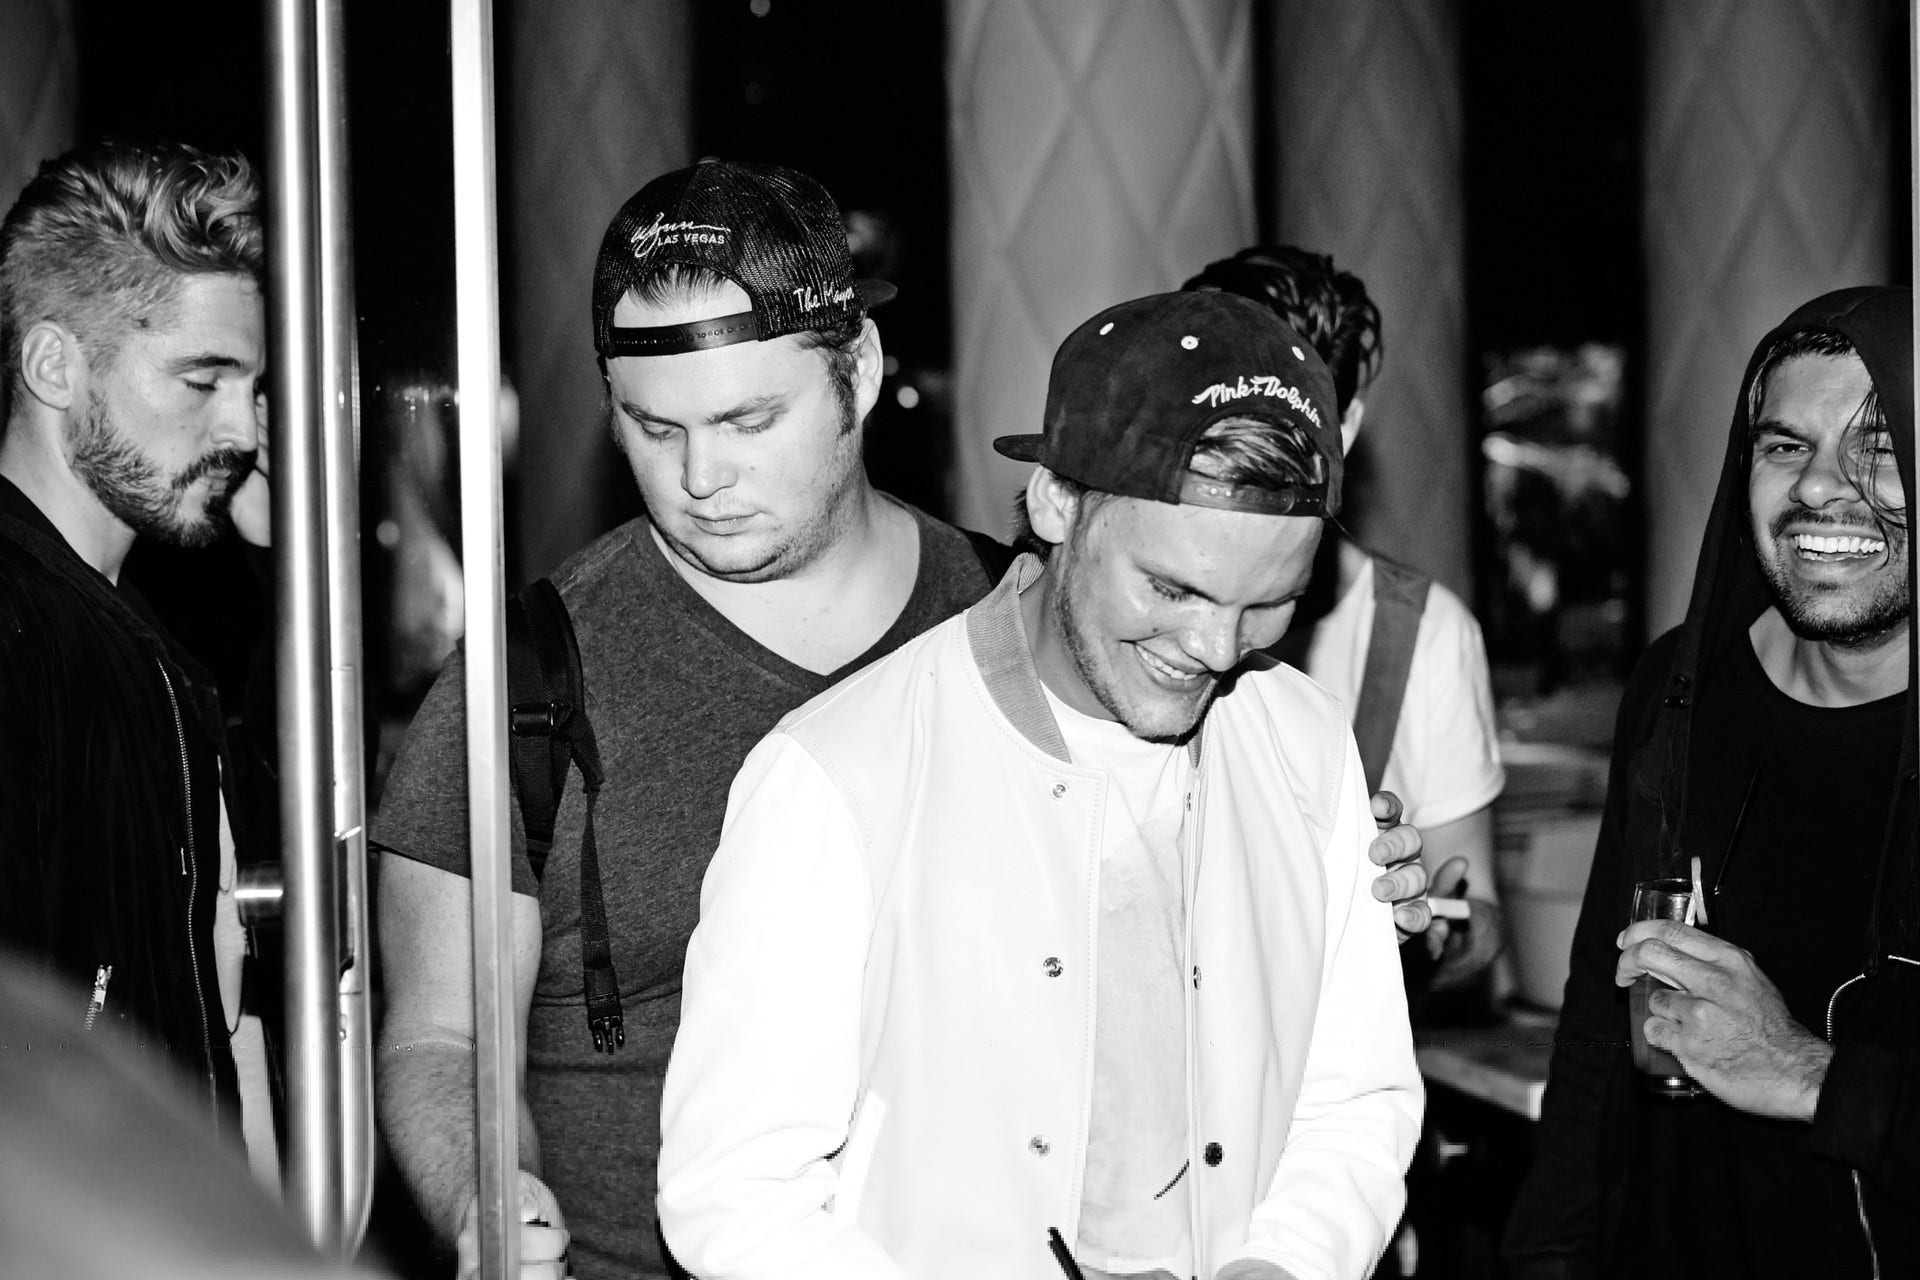 Tim Bergling with his friends.